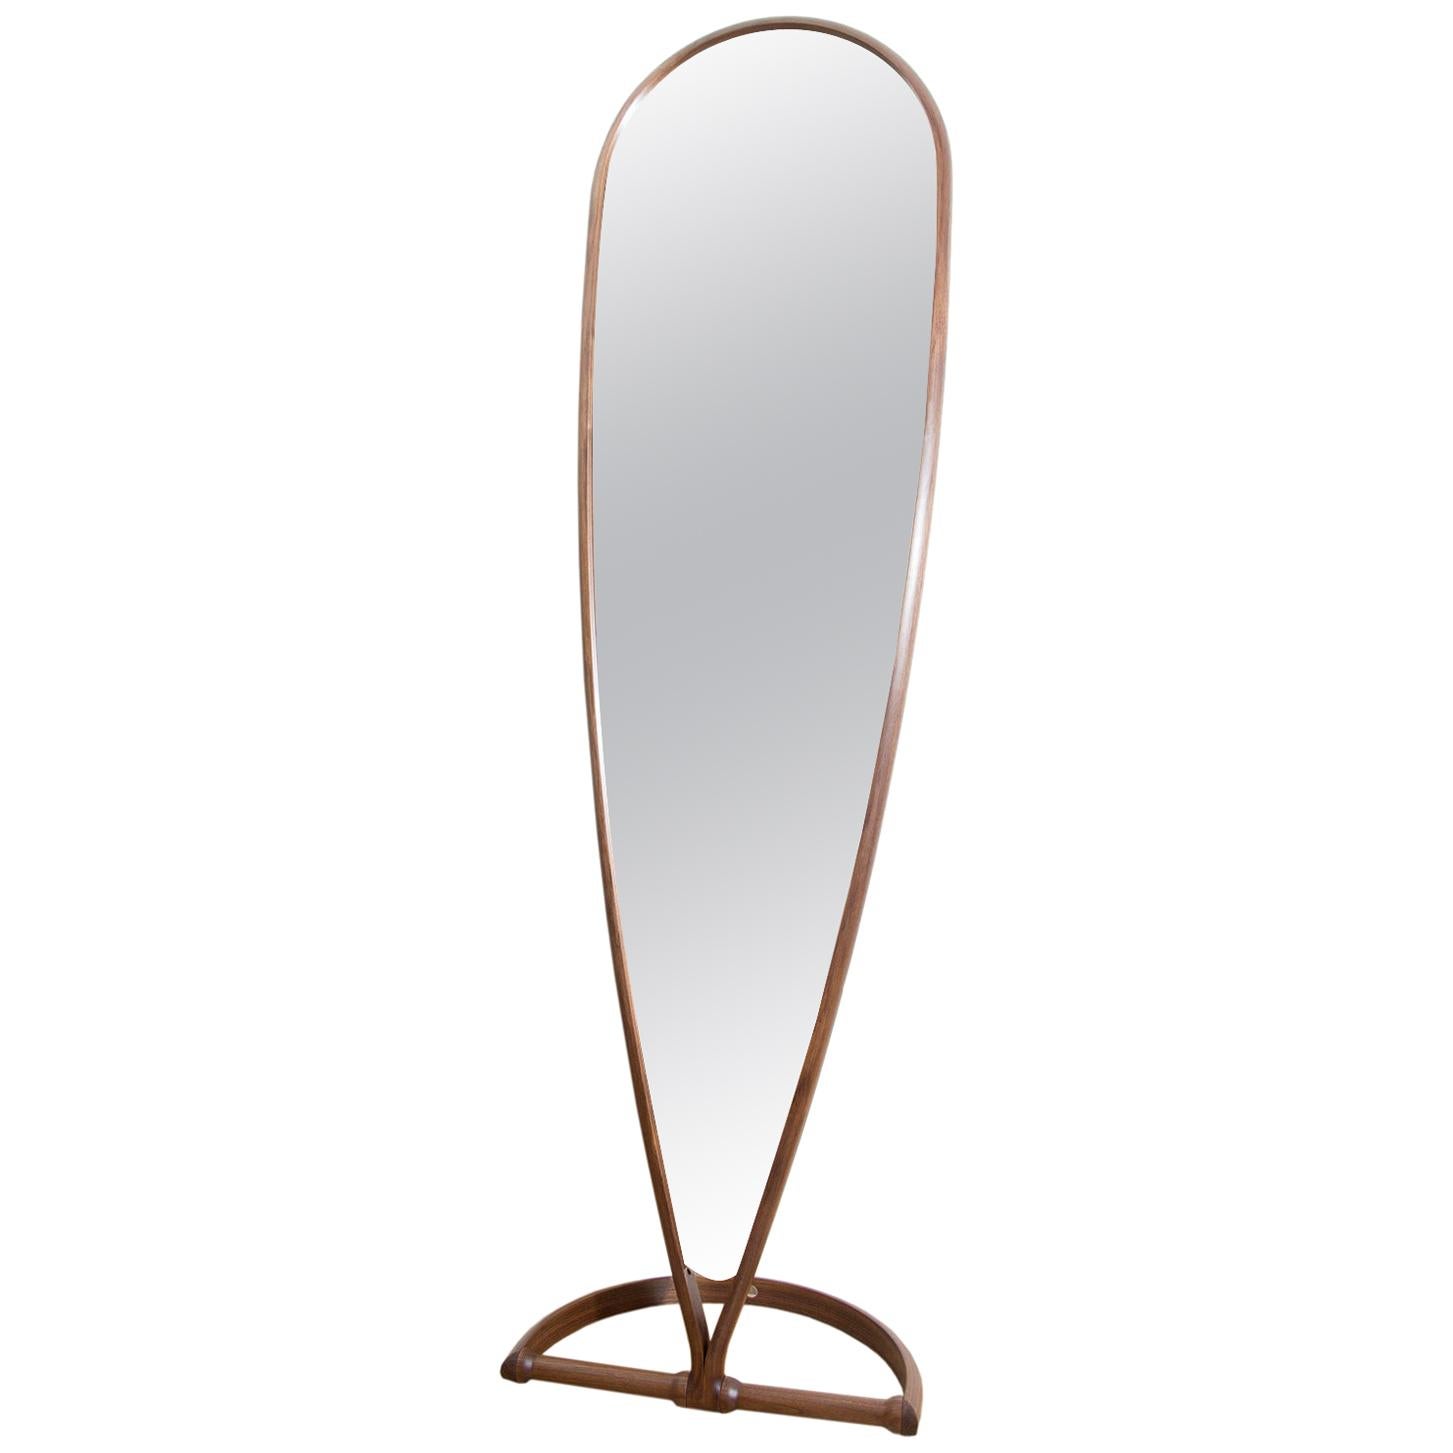 Contemporary curved teardrop shape full-length mirror made in walnut wood For Sale